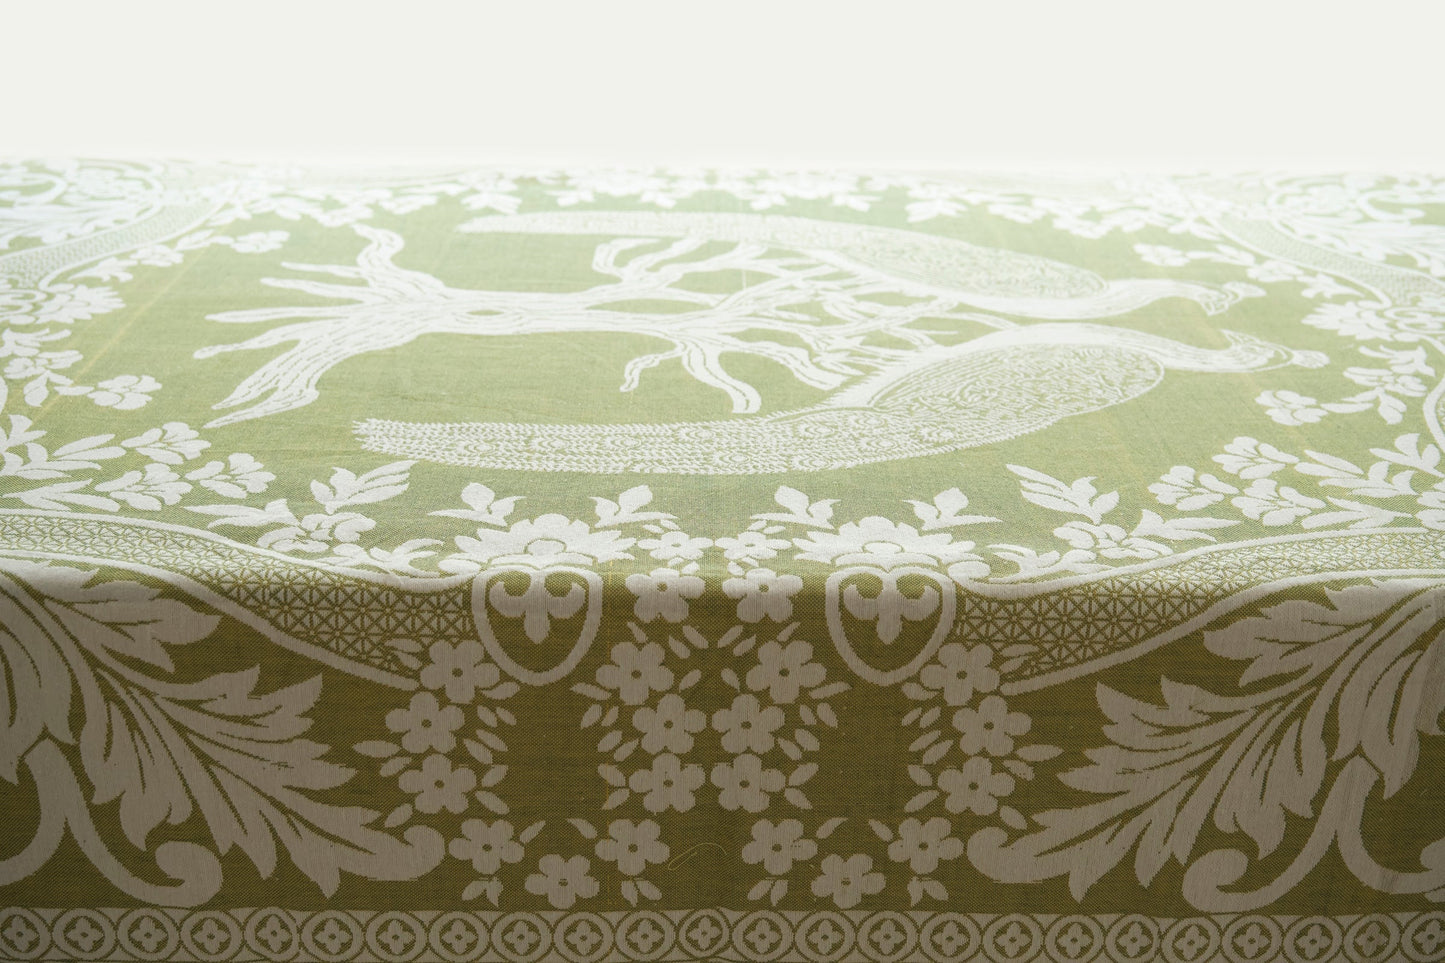 Tablecloth with damask weave in locally harvested organic cotton. Fair Trade from Afghanistan